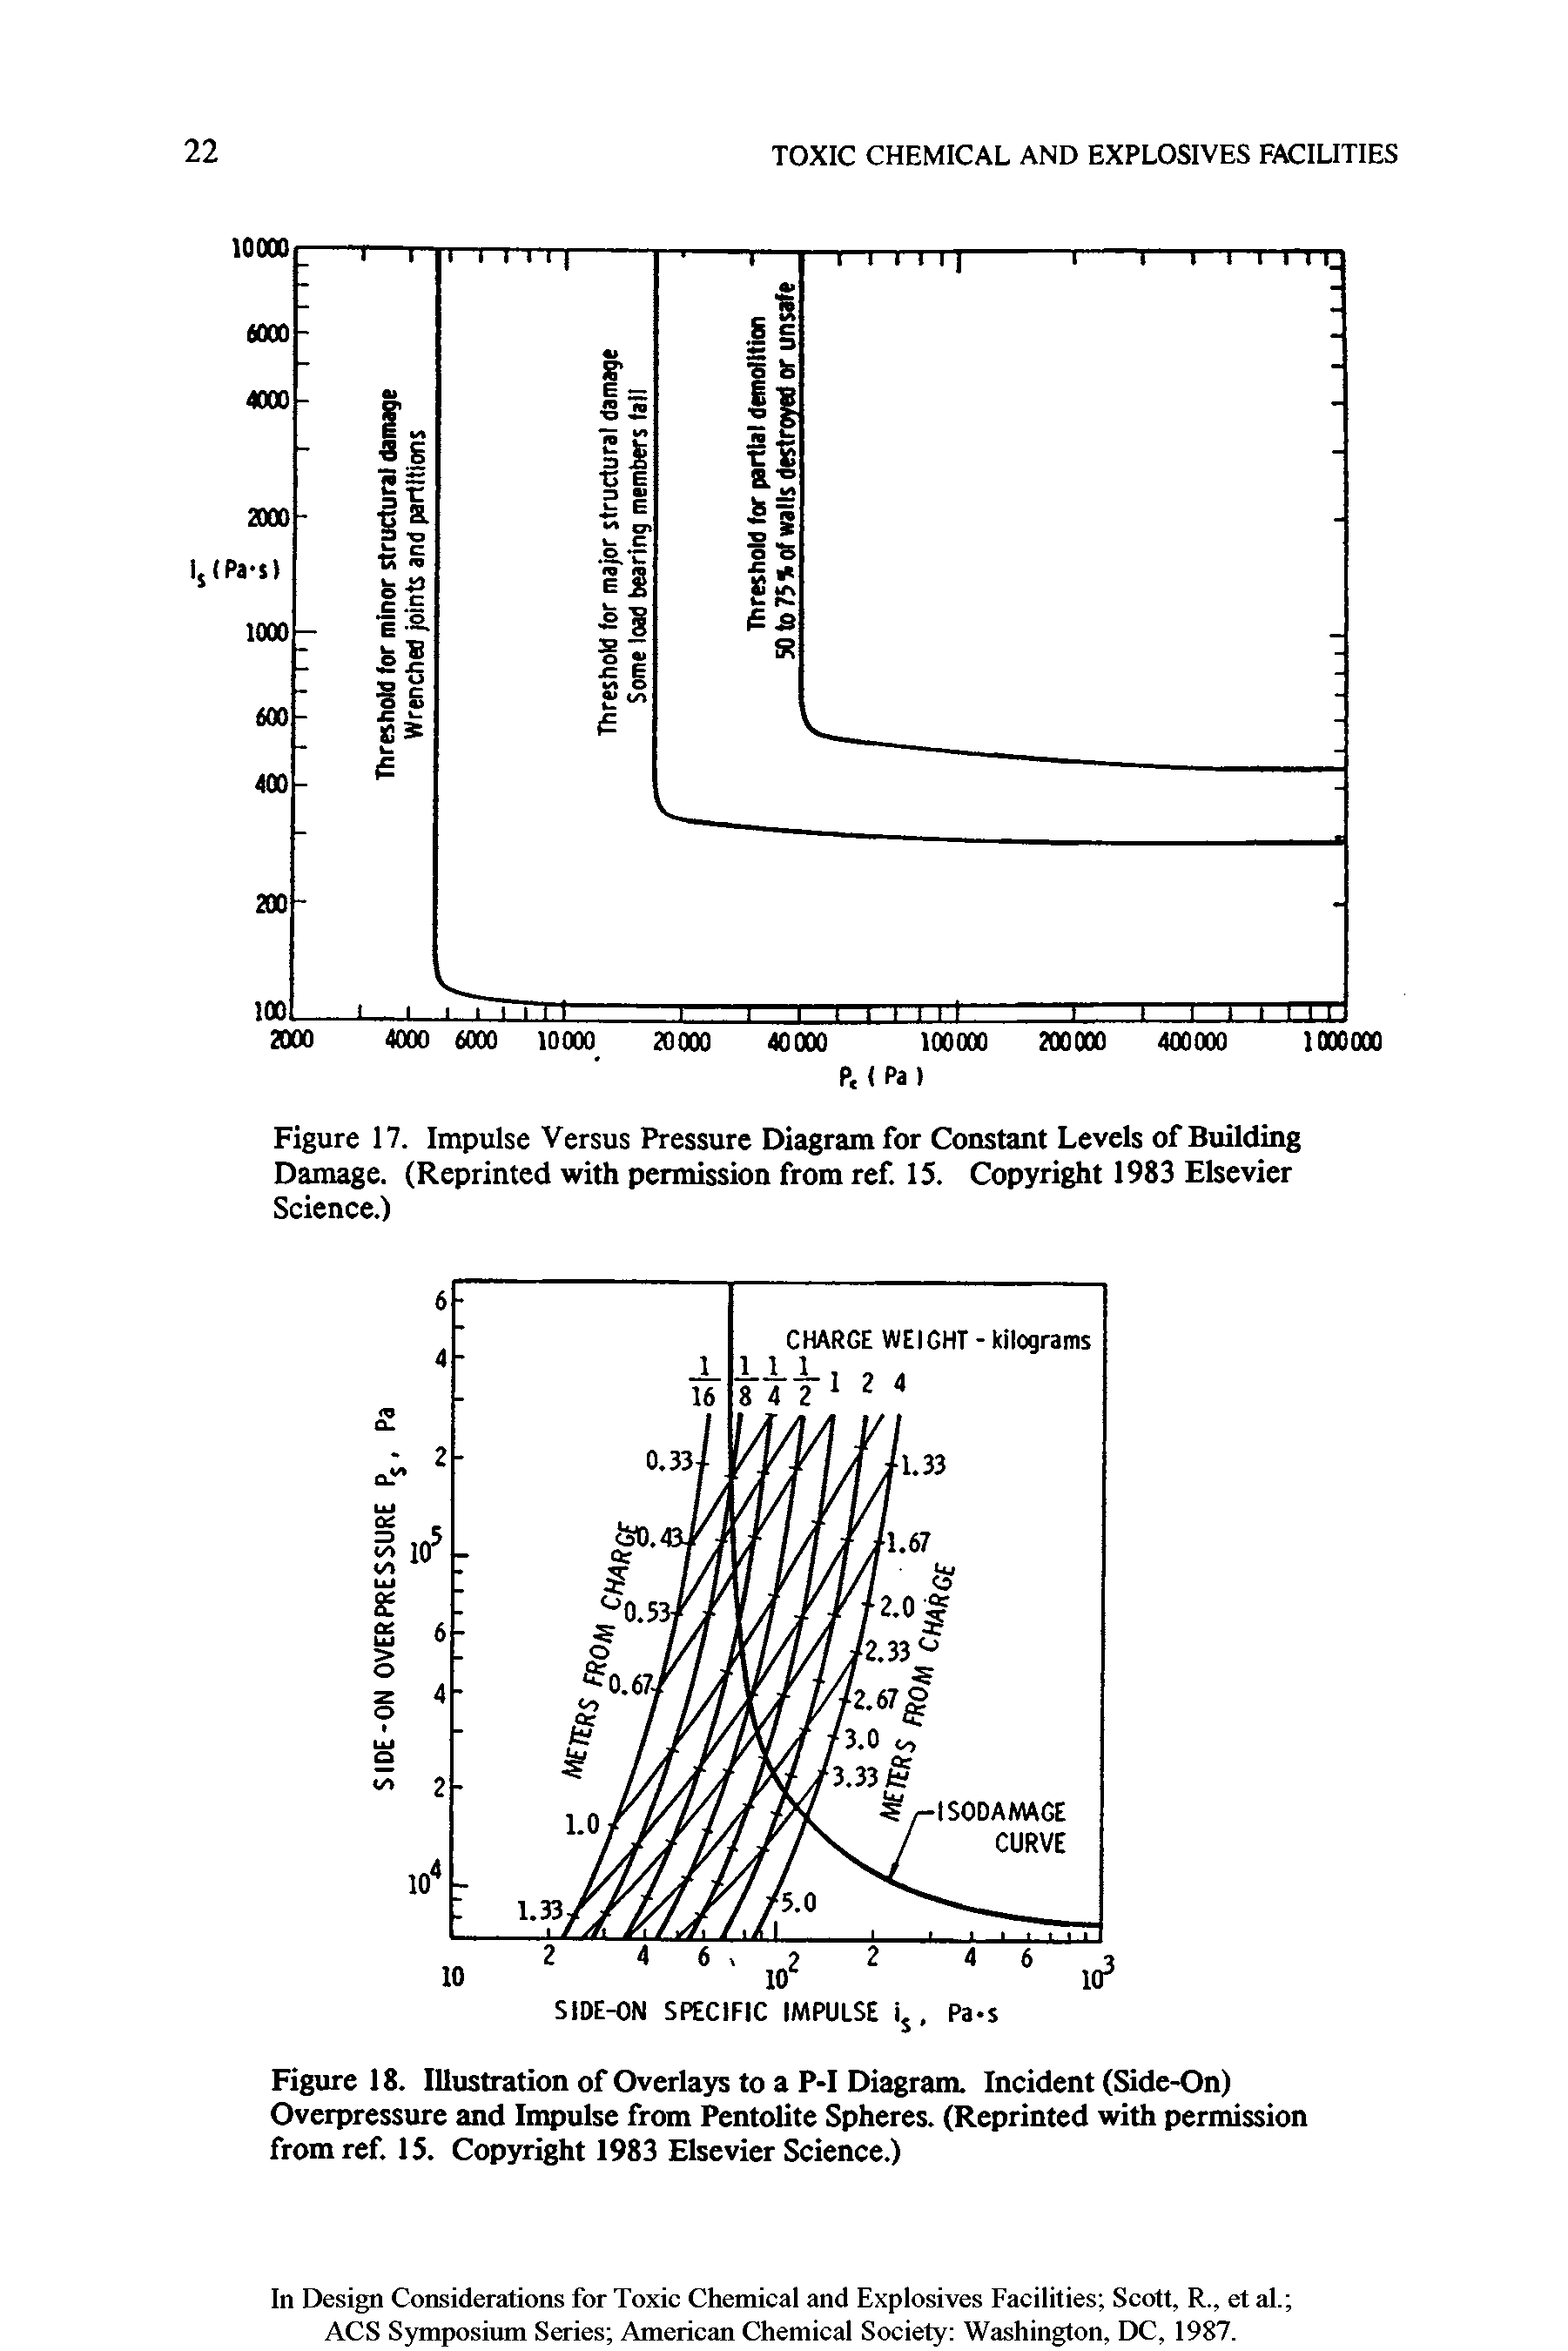 Figure 17. Impulse Versus Pressure Diagram for Constant Levels of Building Damage. (Reprinted with permission from ref. 15. Copyright 1983 Elsevier Science.)...